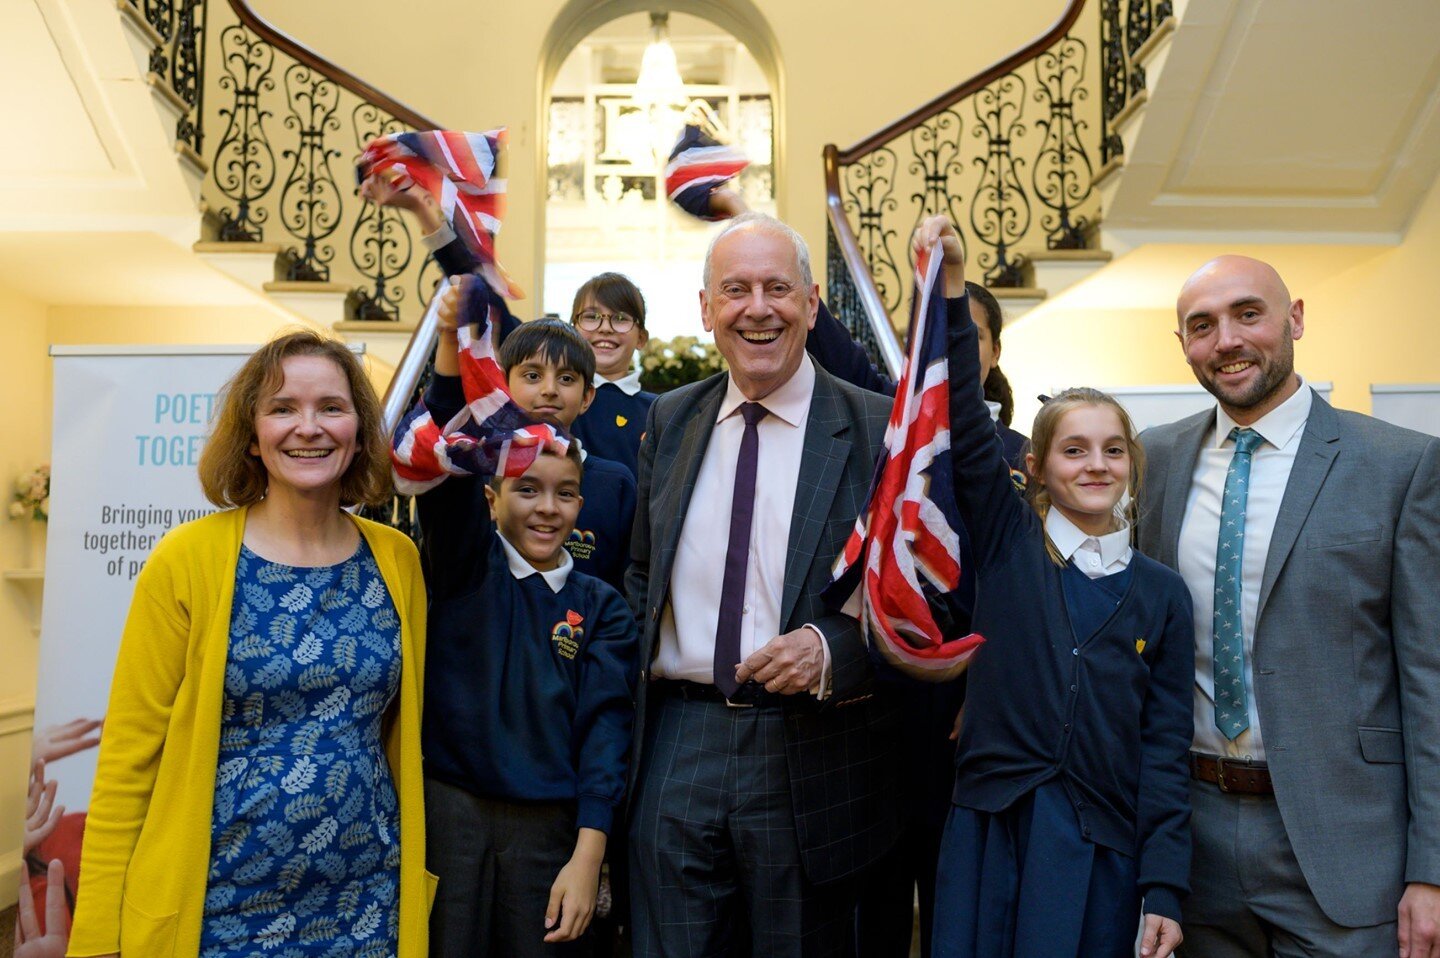 &quot;In infants and young children, engaging with poetry can improve the speed at which they learn to speak,&quot; said #PoetryTogether founder @gylesbrandreth in Schools Week.

Schools and care homes: share the cognitive benefits of #poetry by reci